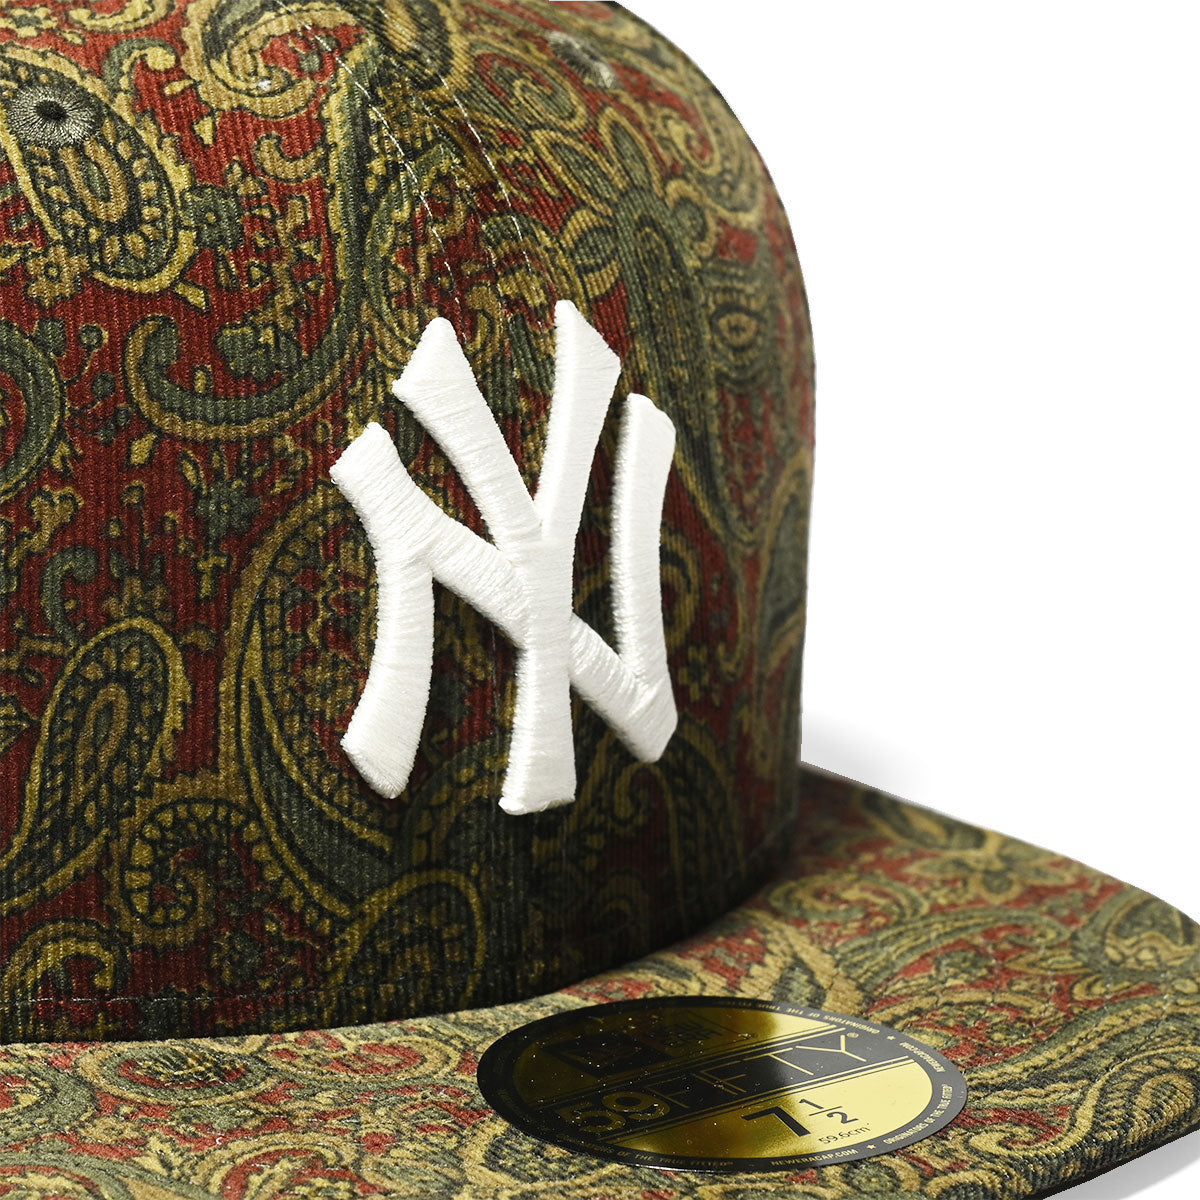 NEW ERA New York Yankees - 59FIFTY TRADITIONAL PACK PAISLEY [14122478]